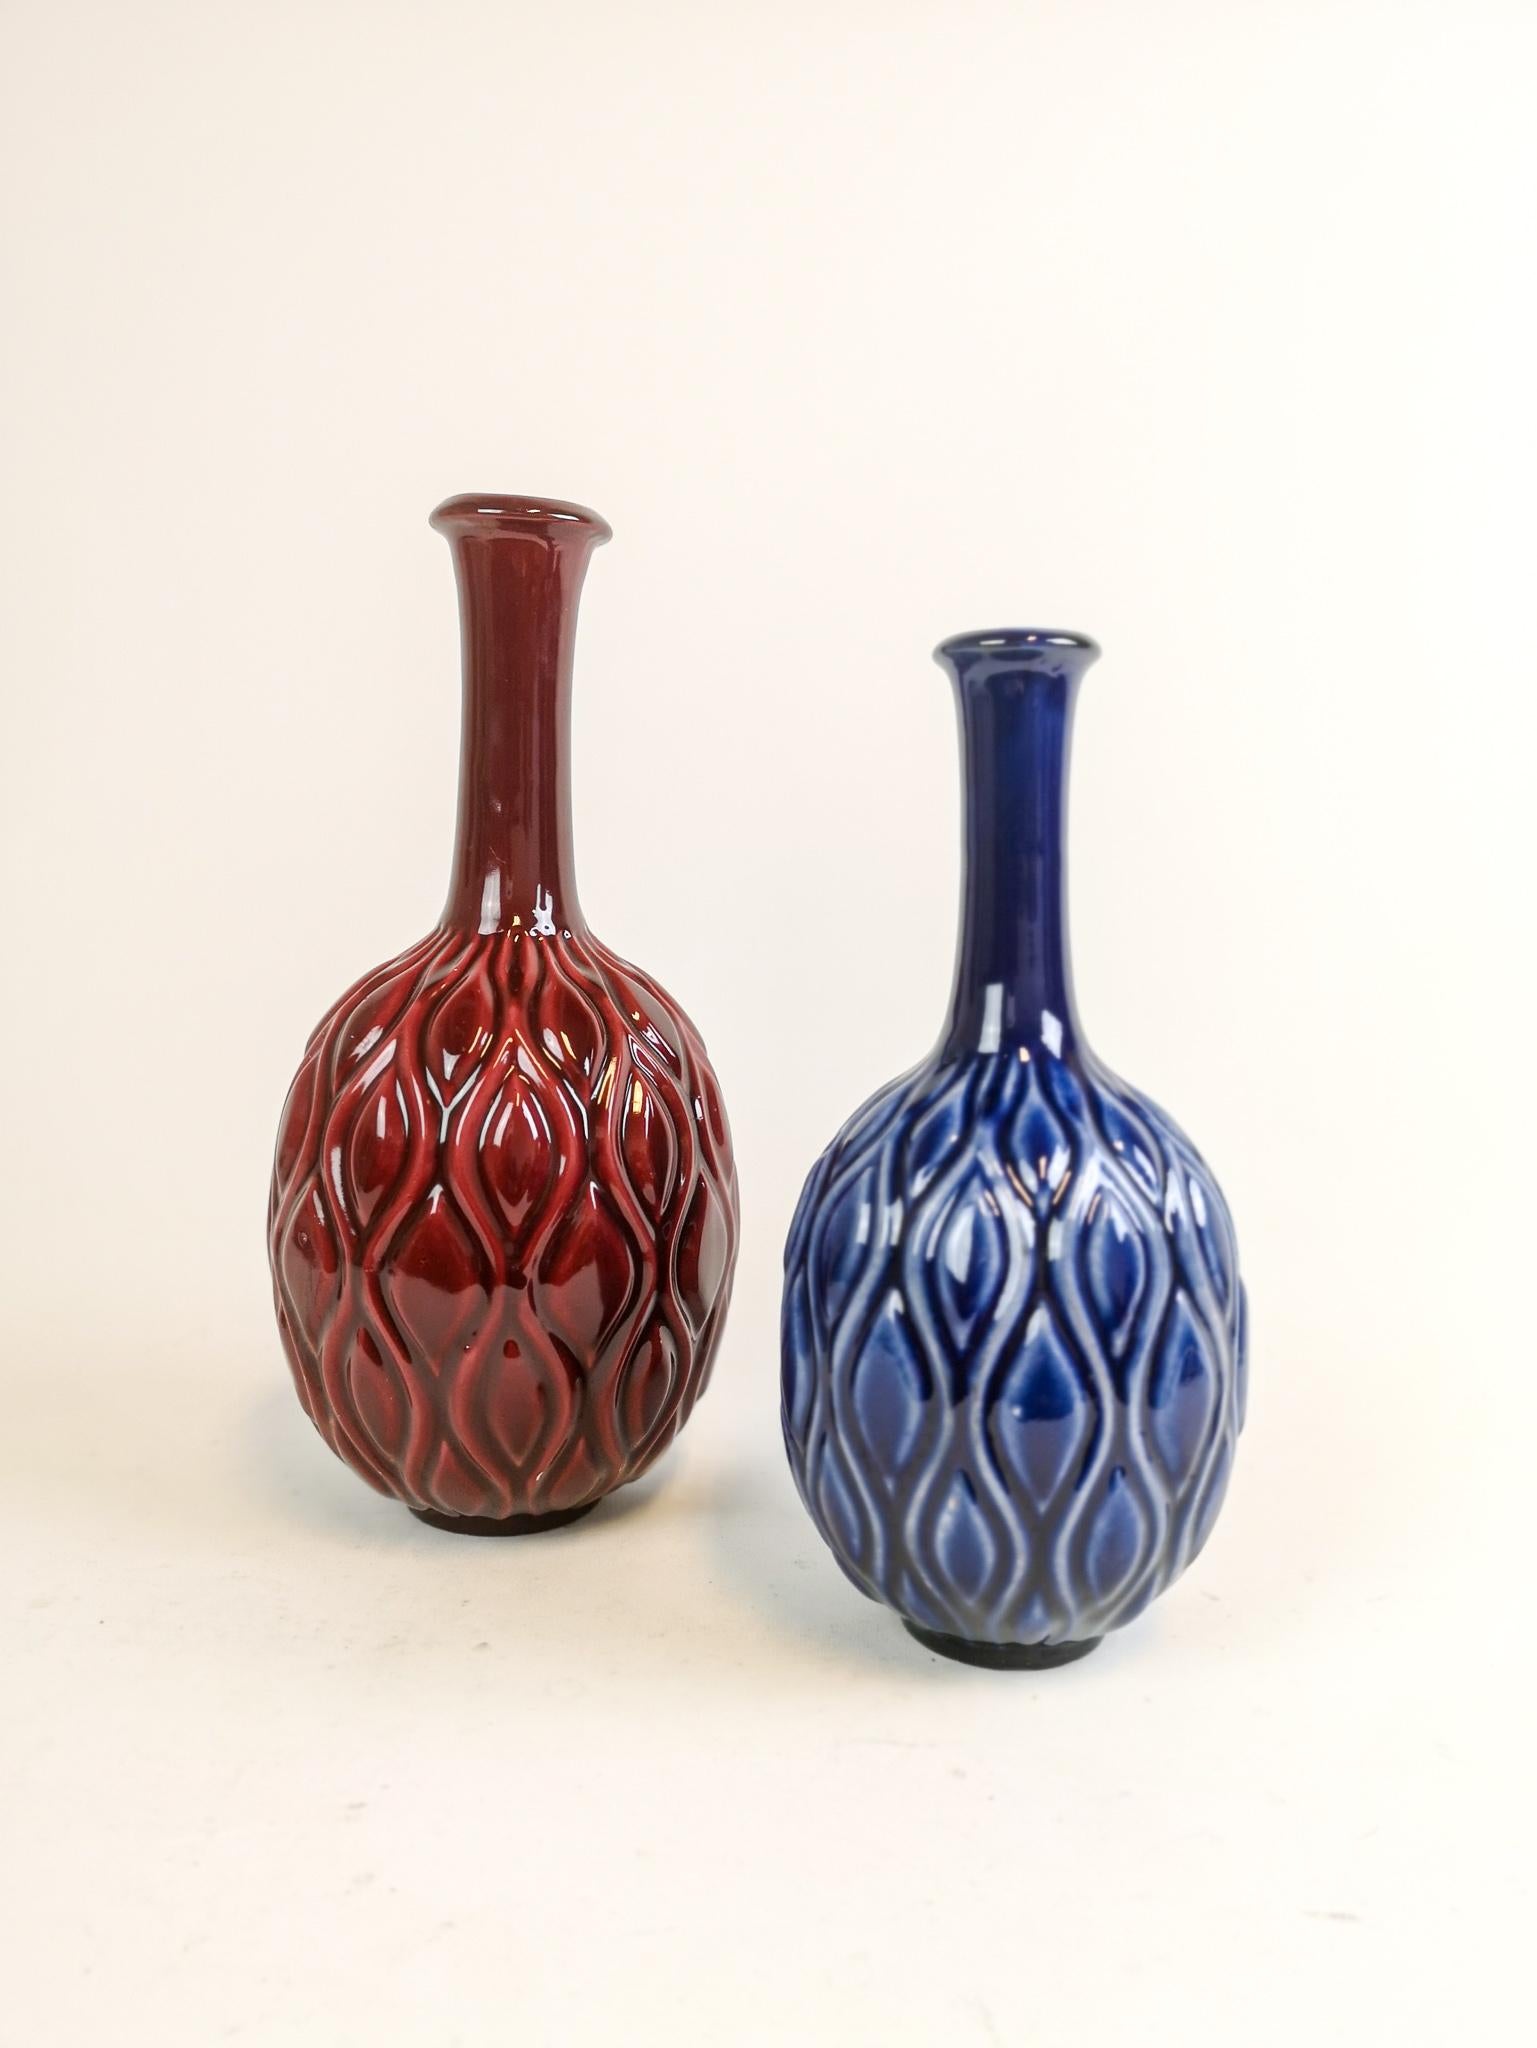 Wonderful blue and red ceramic vases in peacock looking pattern. Designed by Sven Erik Skawonius for Upsala Ekeby, Sweden, 1954.

Very good condition

Measures: Blue H 25 cm, D 12 cm. and Red H 29, D 14 cm.
 